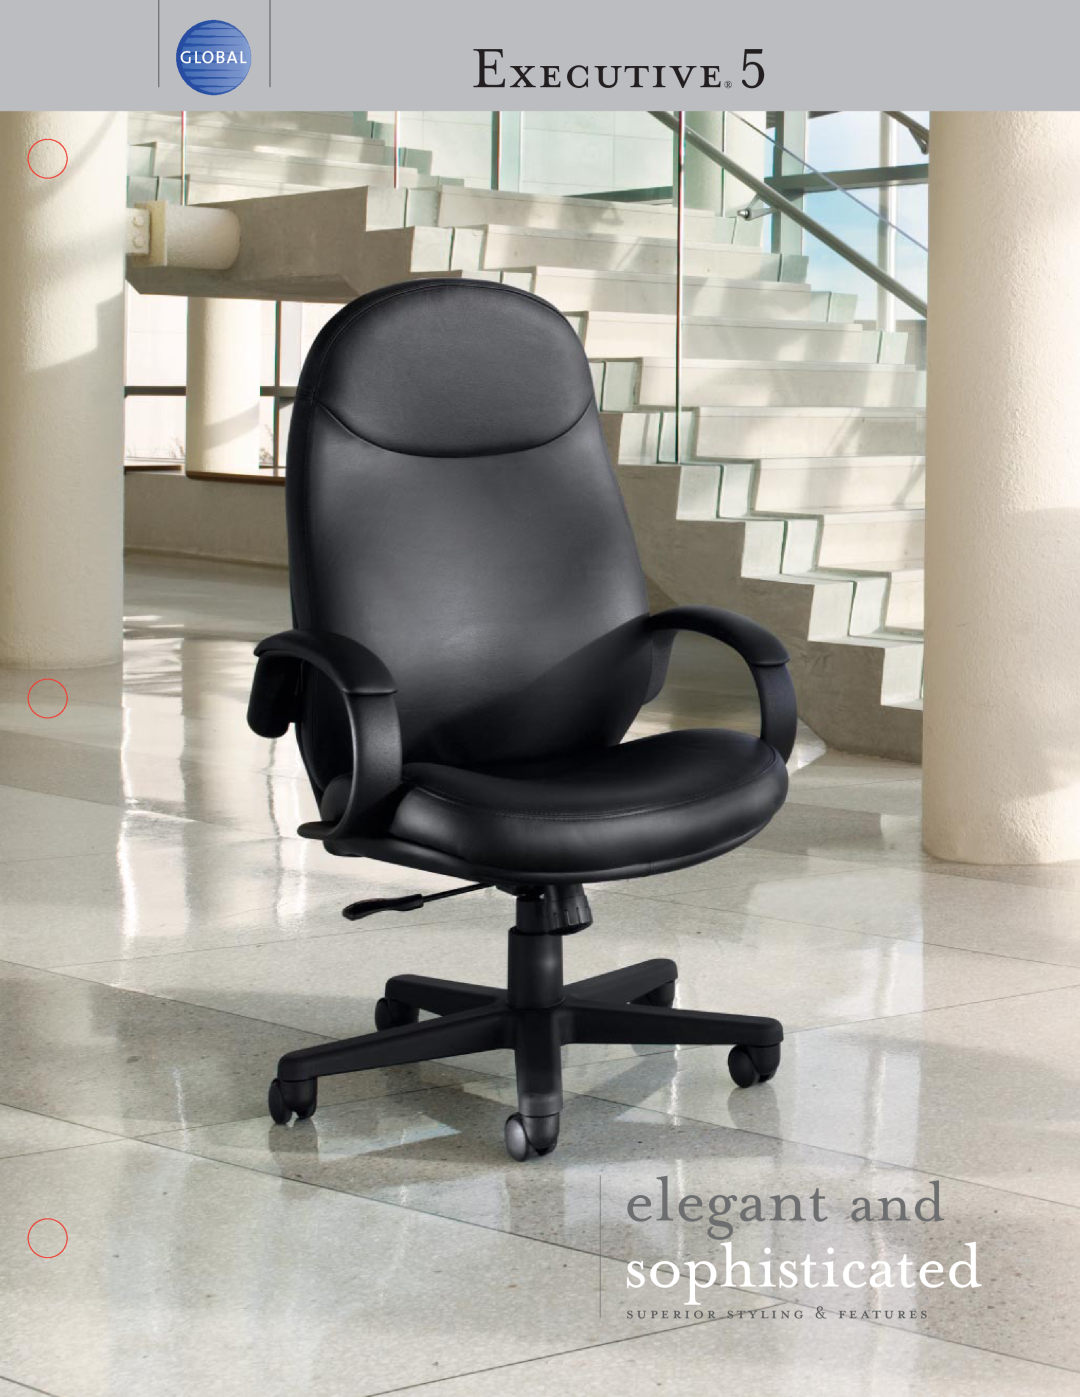 Global Upholstery Co 5575, 5571, 5576 manual Executive, elegant and sophisticated, superior styling & features 